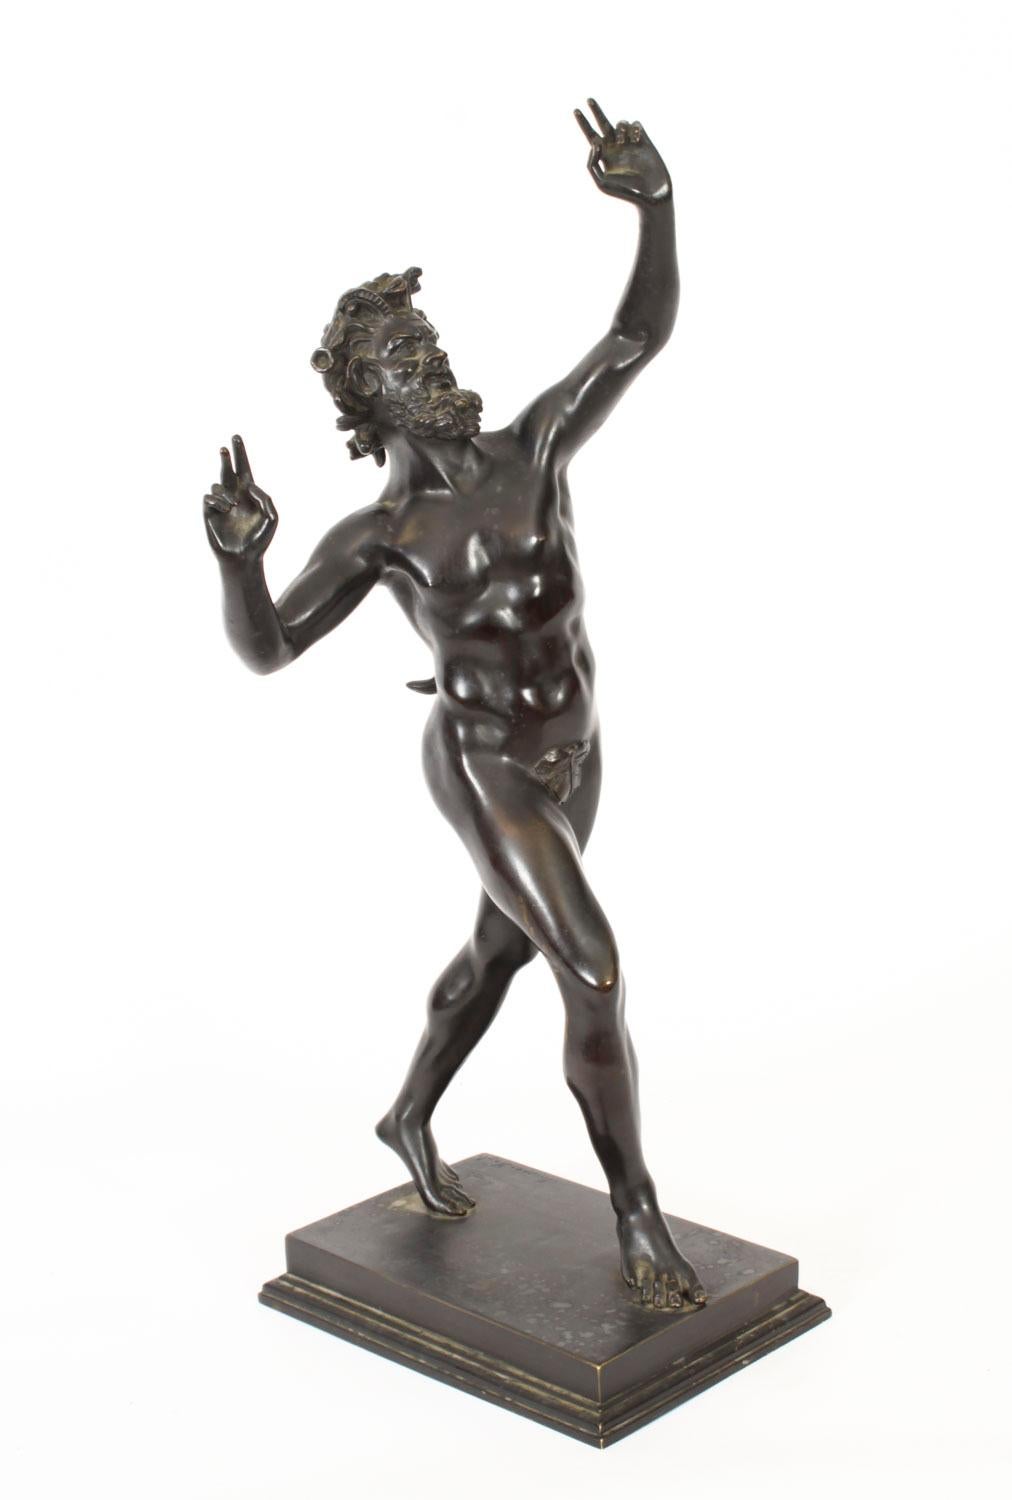 This is a large French Grand Tour bronze sculpture of  Pan the Roman fertility God of the forest issued by the 